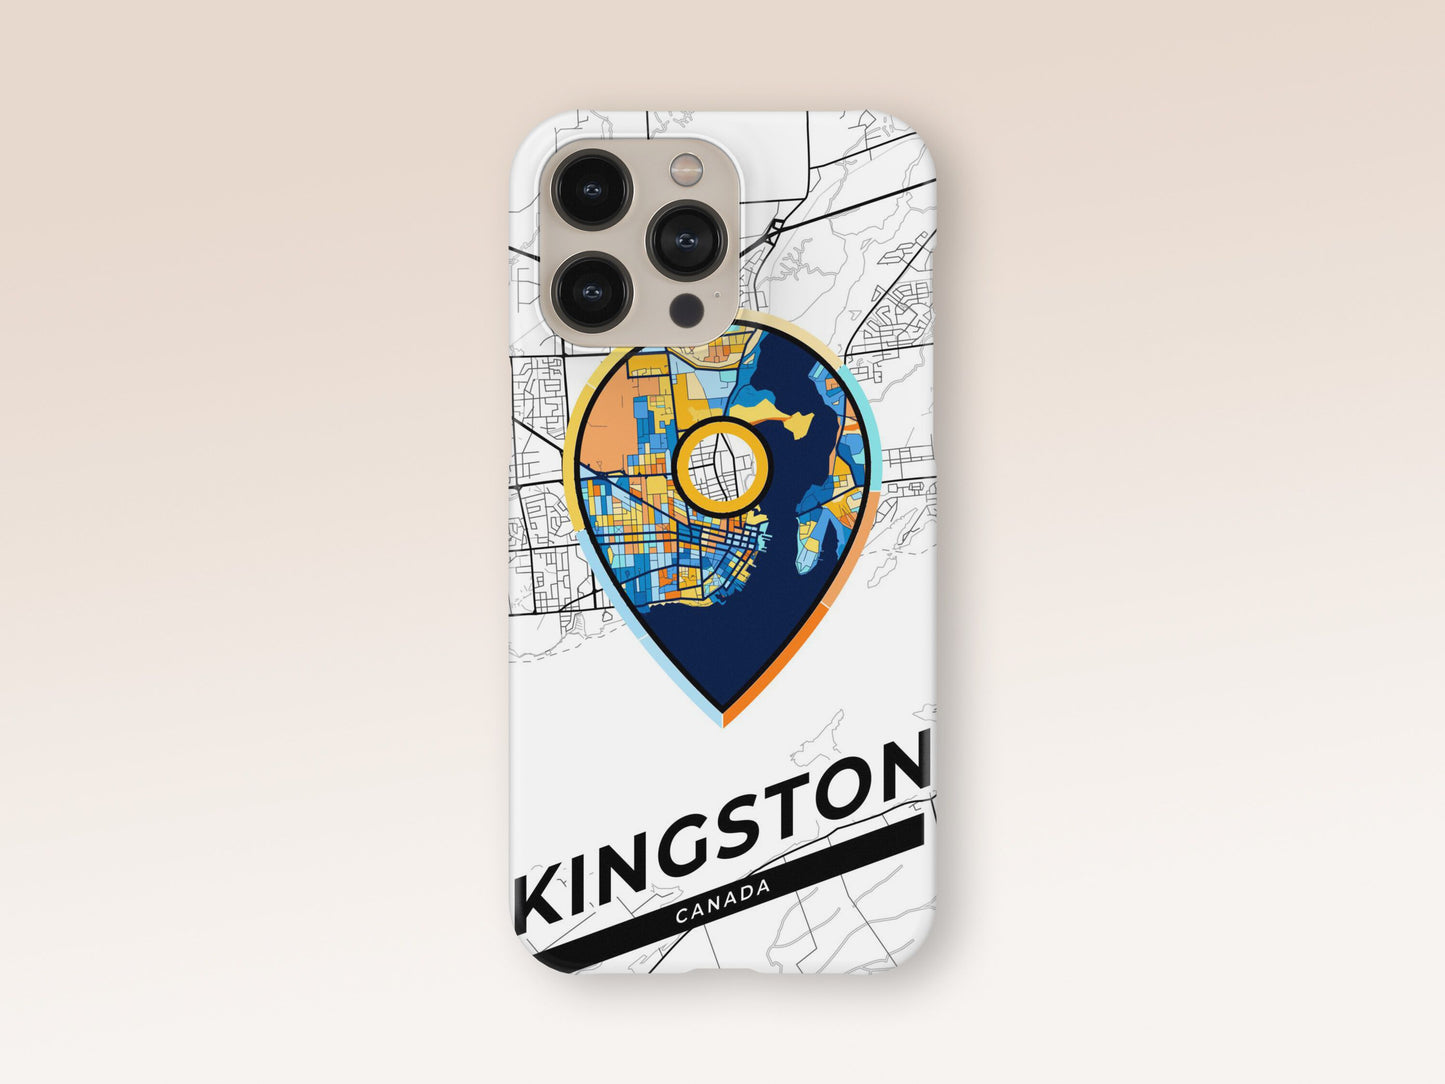 Kingston Canada slim phone case with colorful icon. Birthday, wedding or housewarming gift. Couple match cases. 1